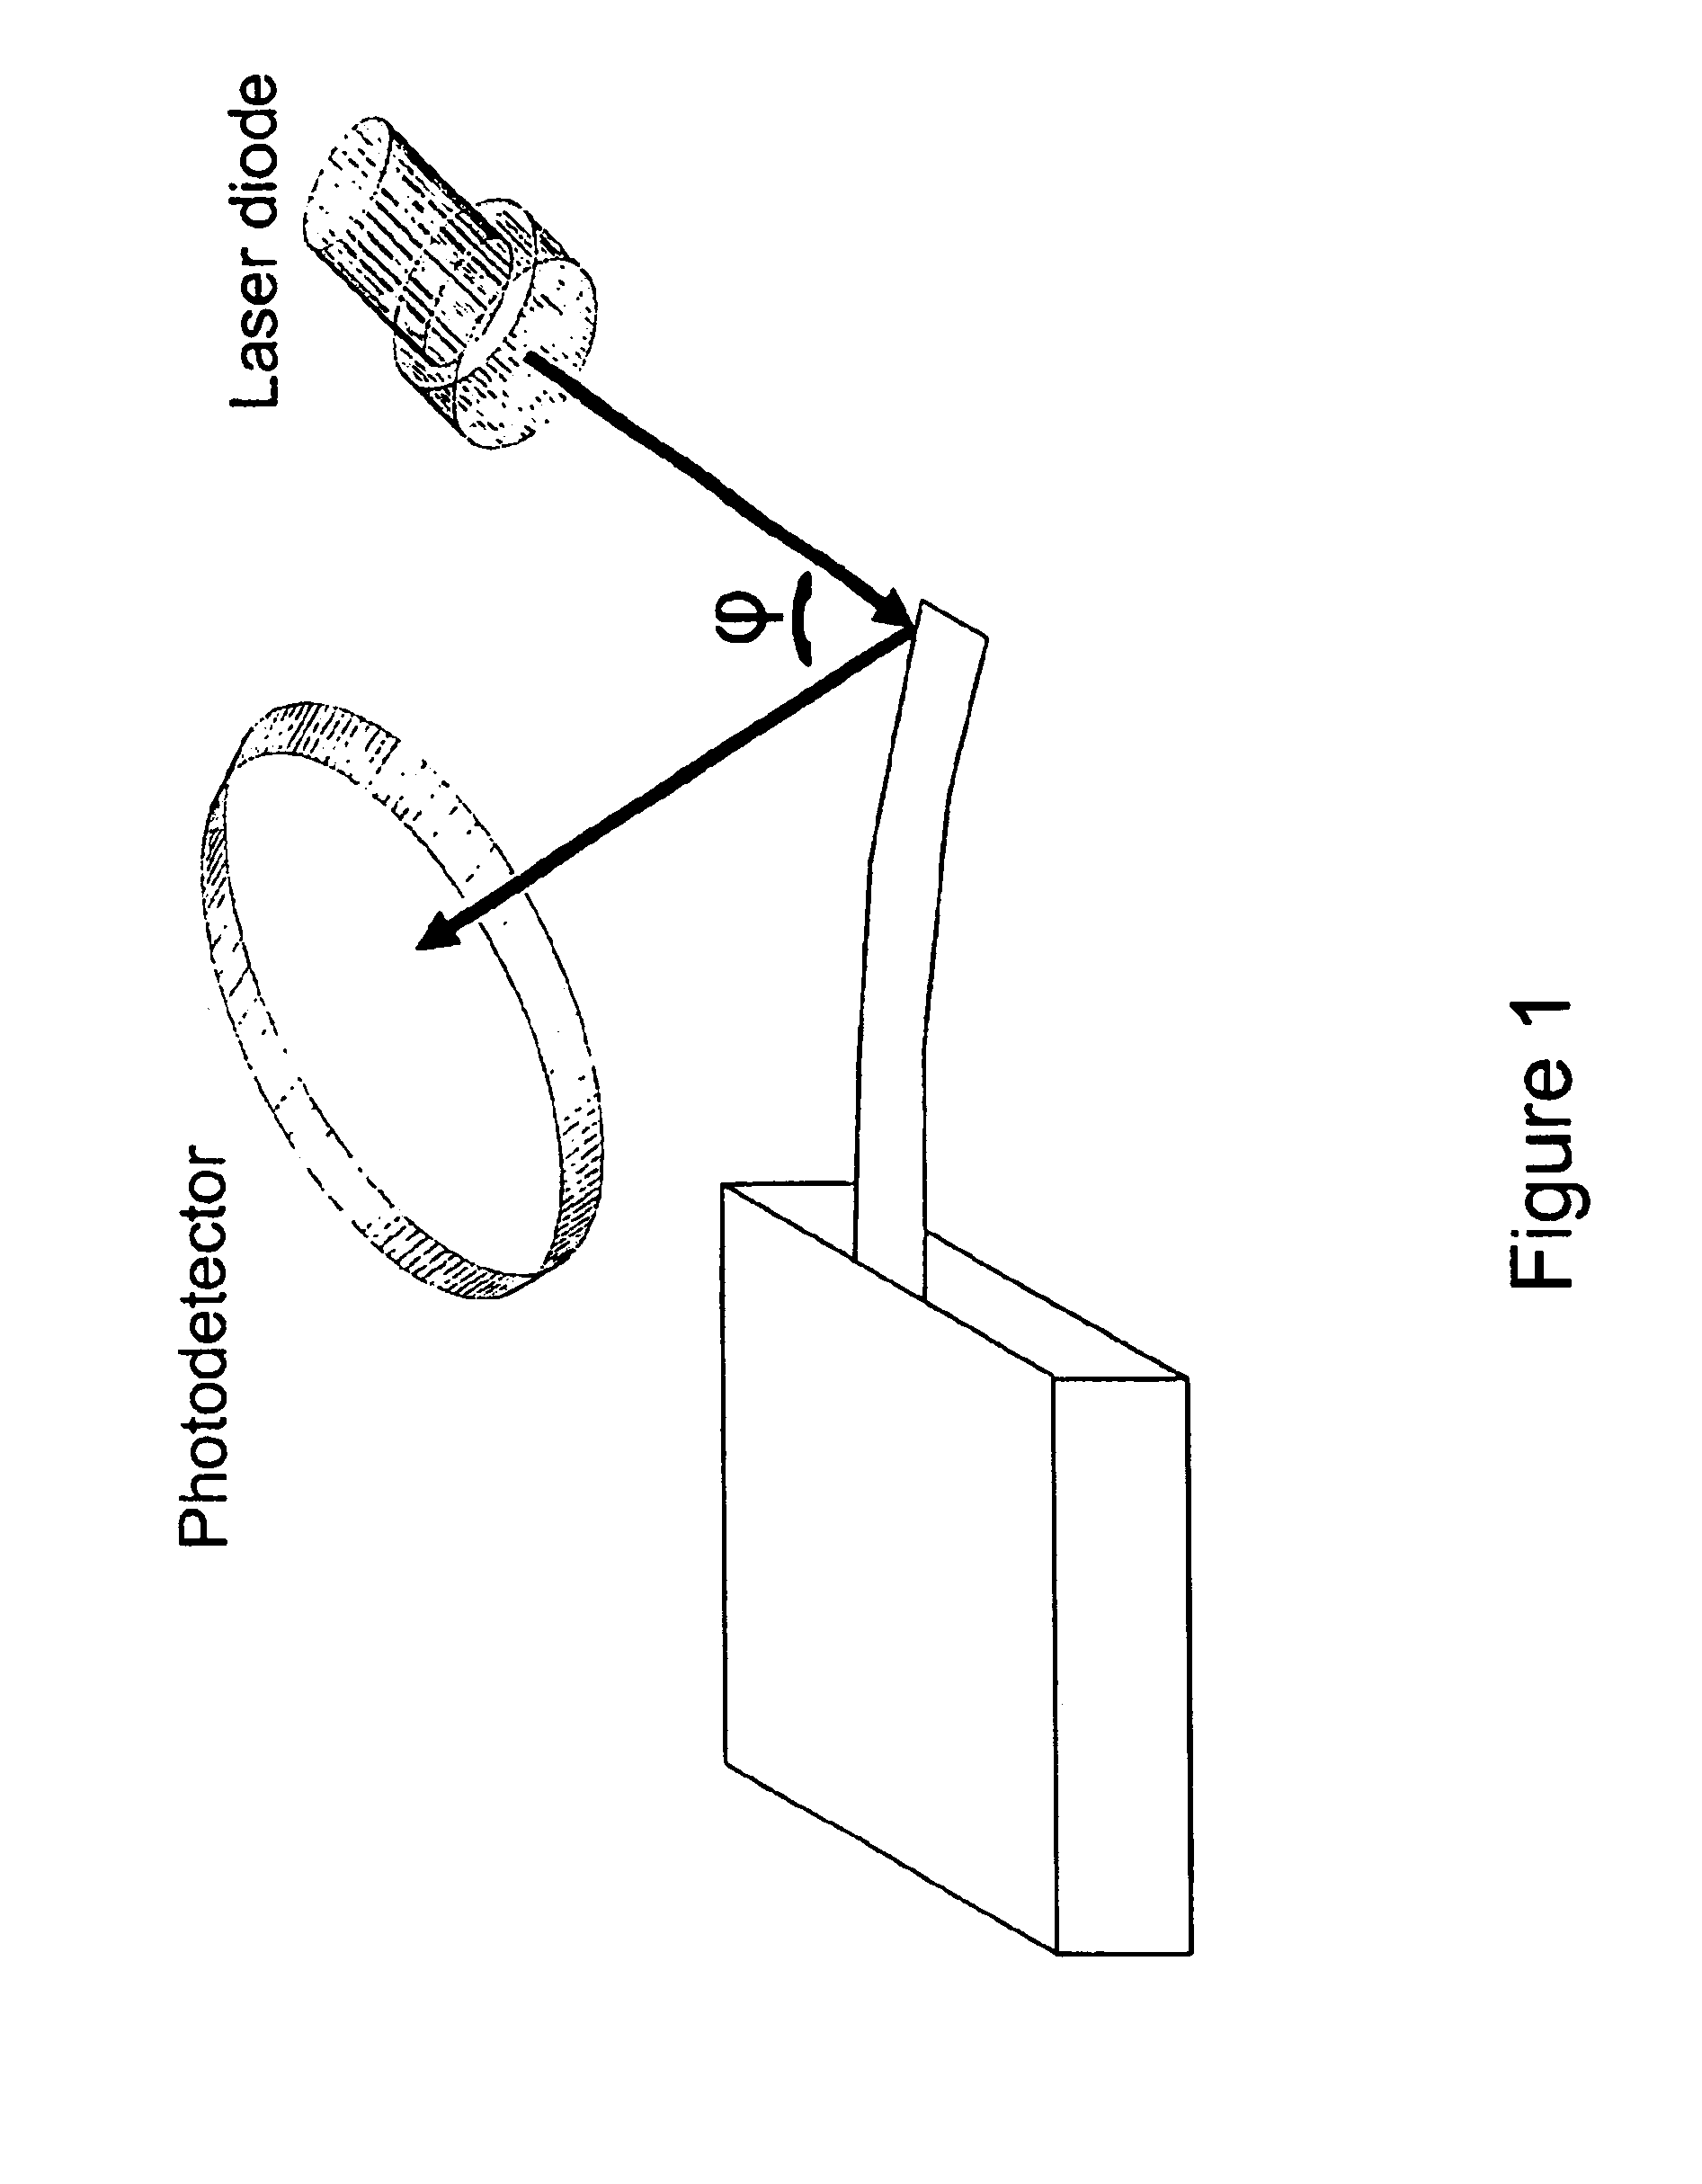 Microscale sensor element and related device and method of use